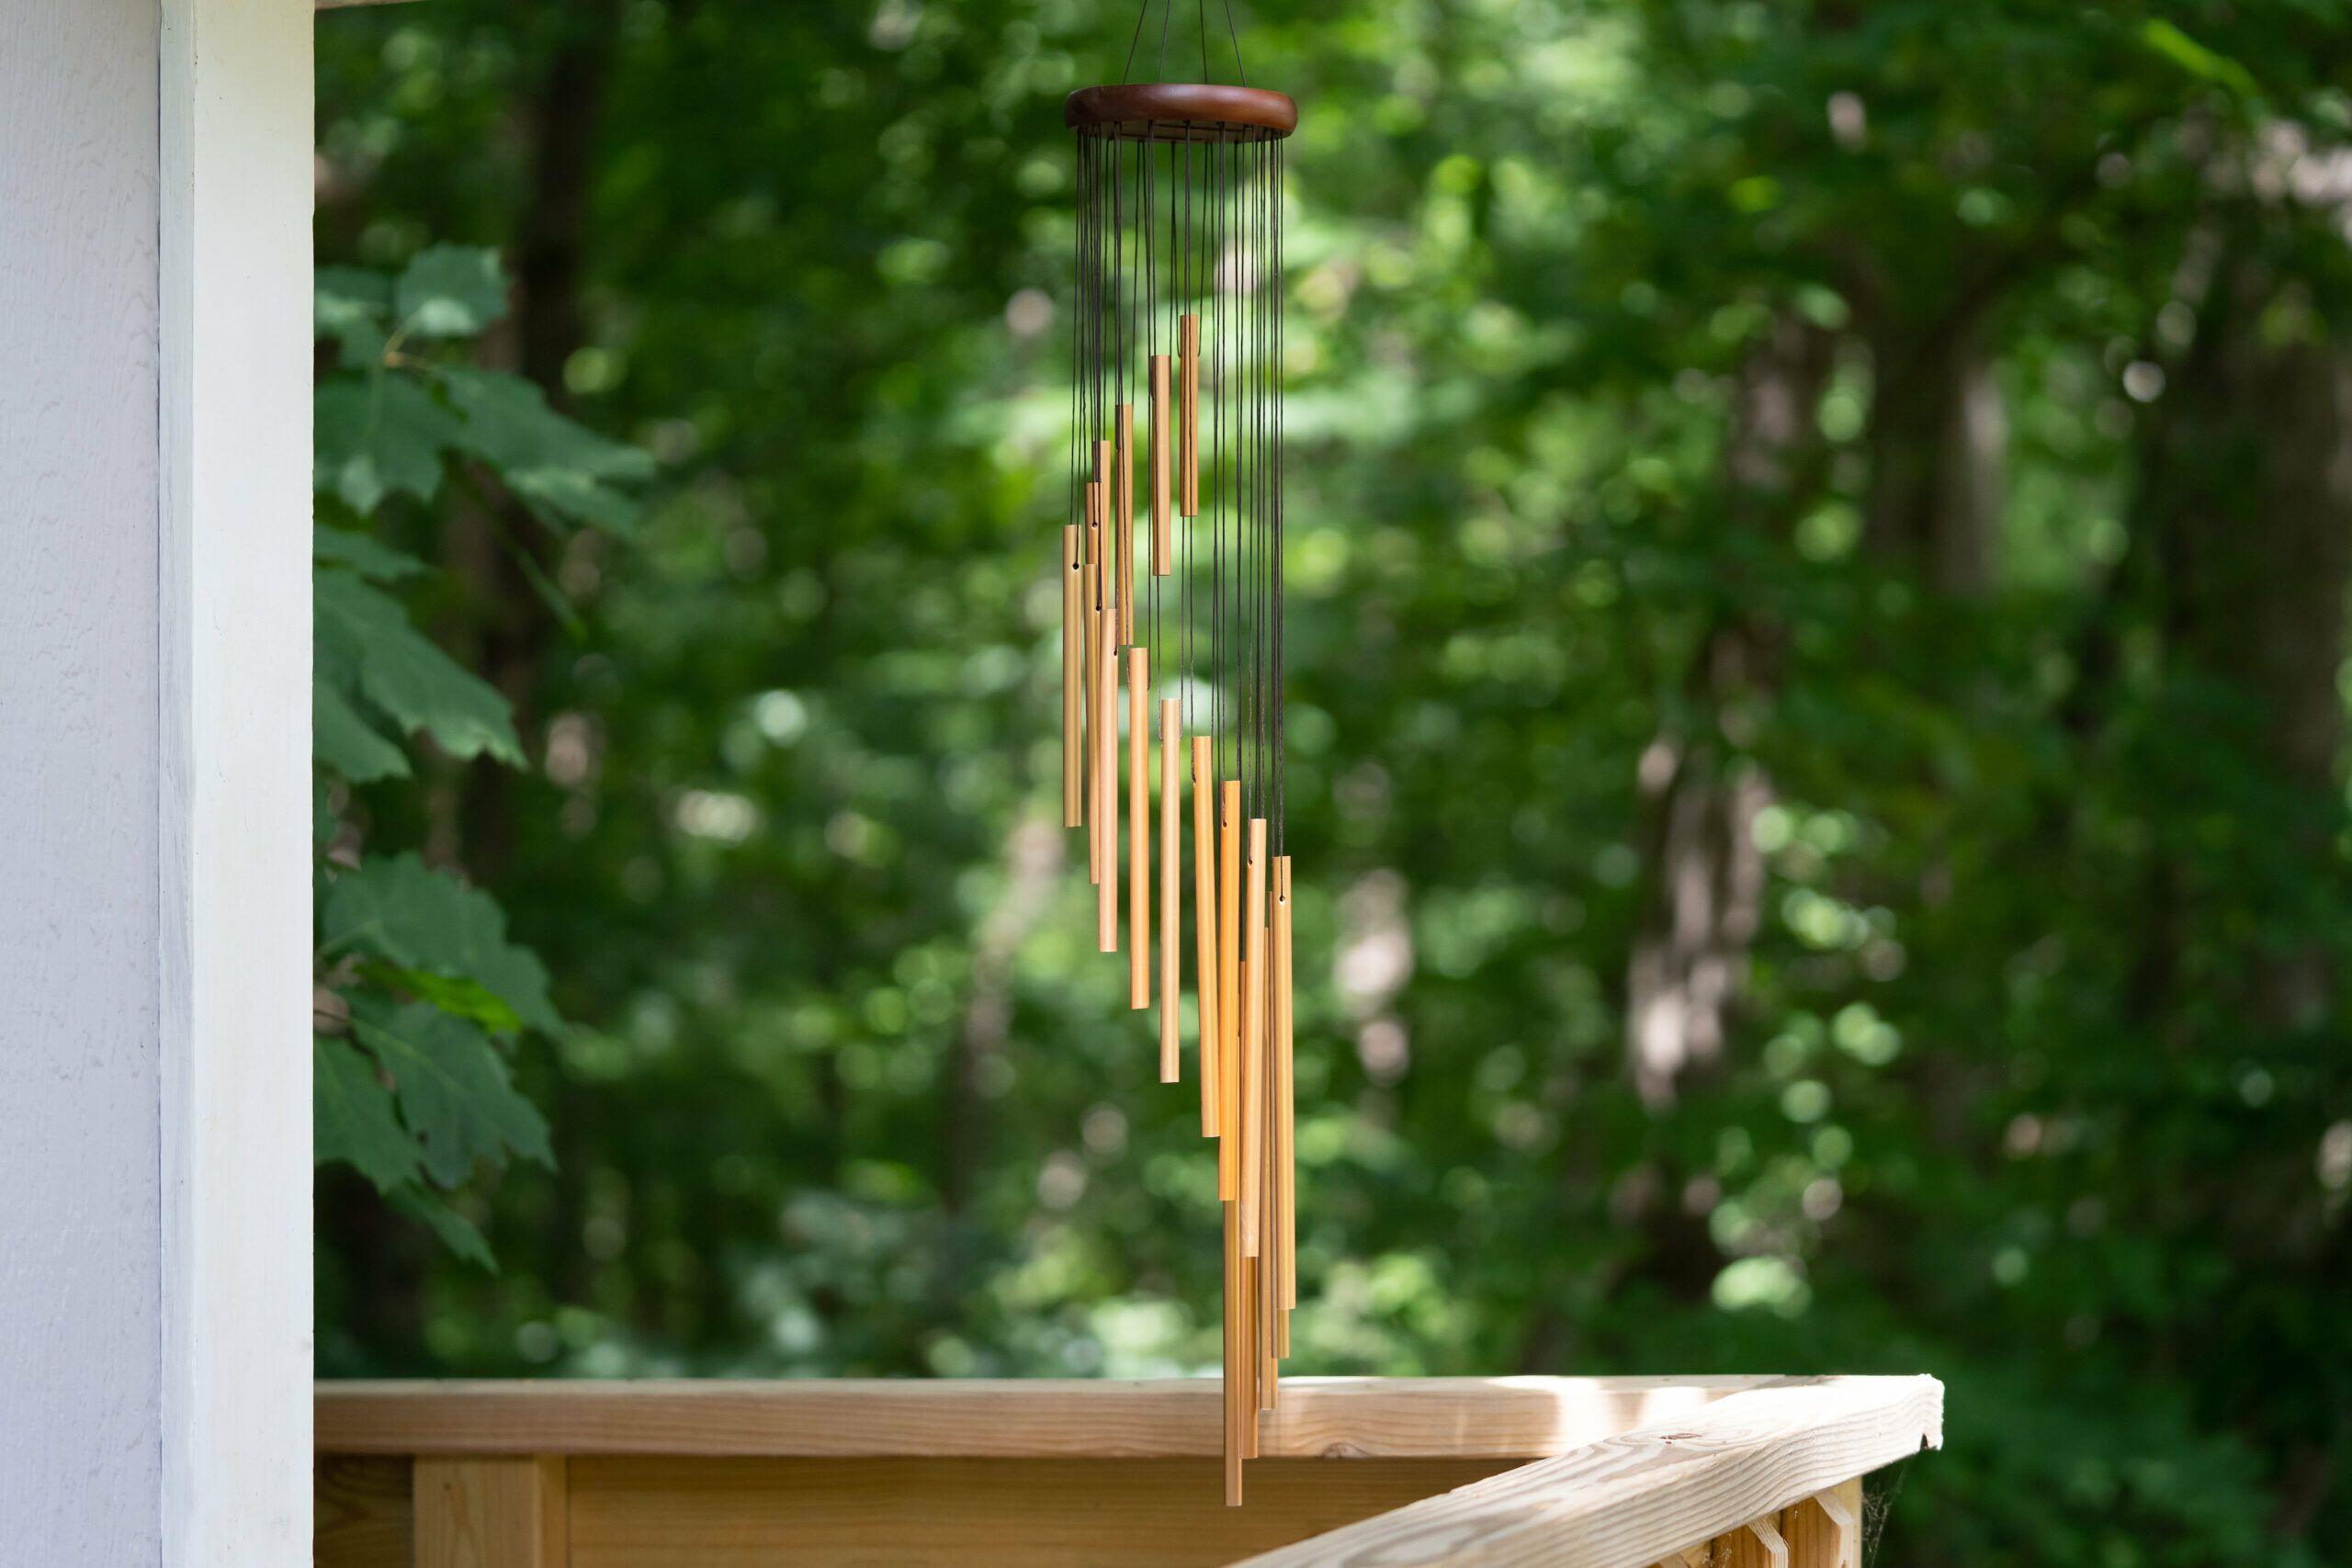 How To Hang Wind Chimes On Porch